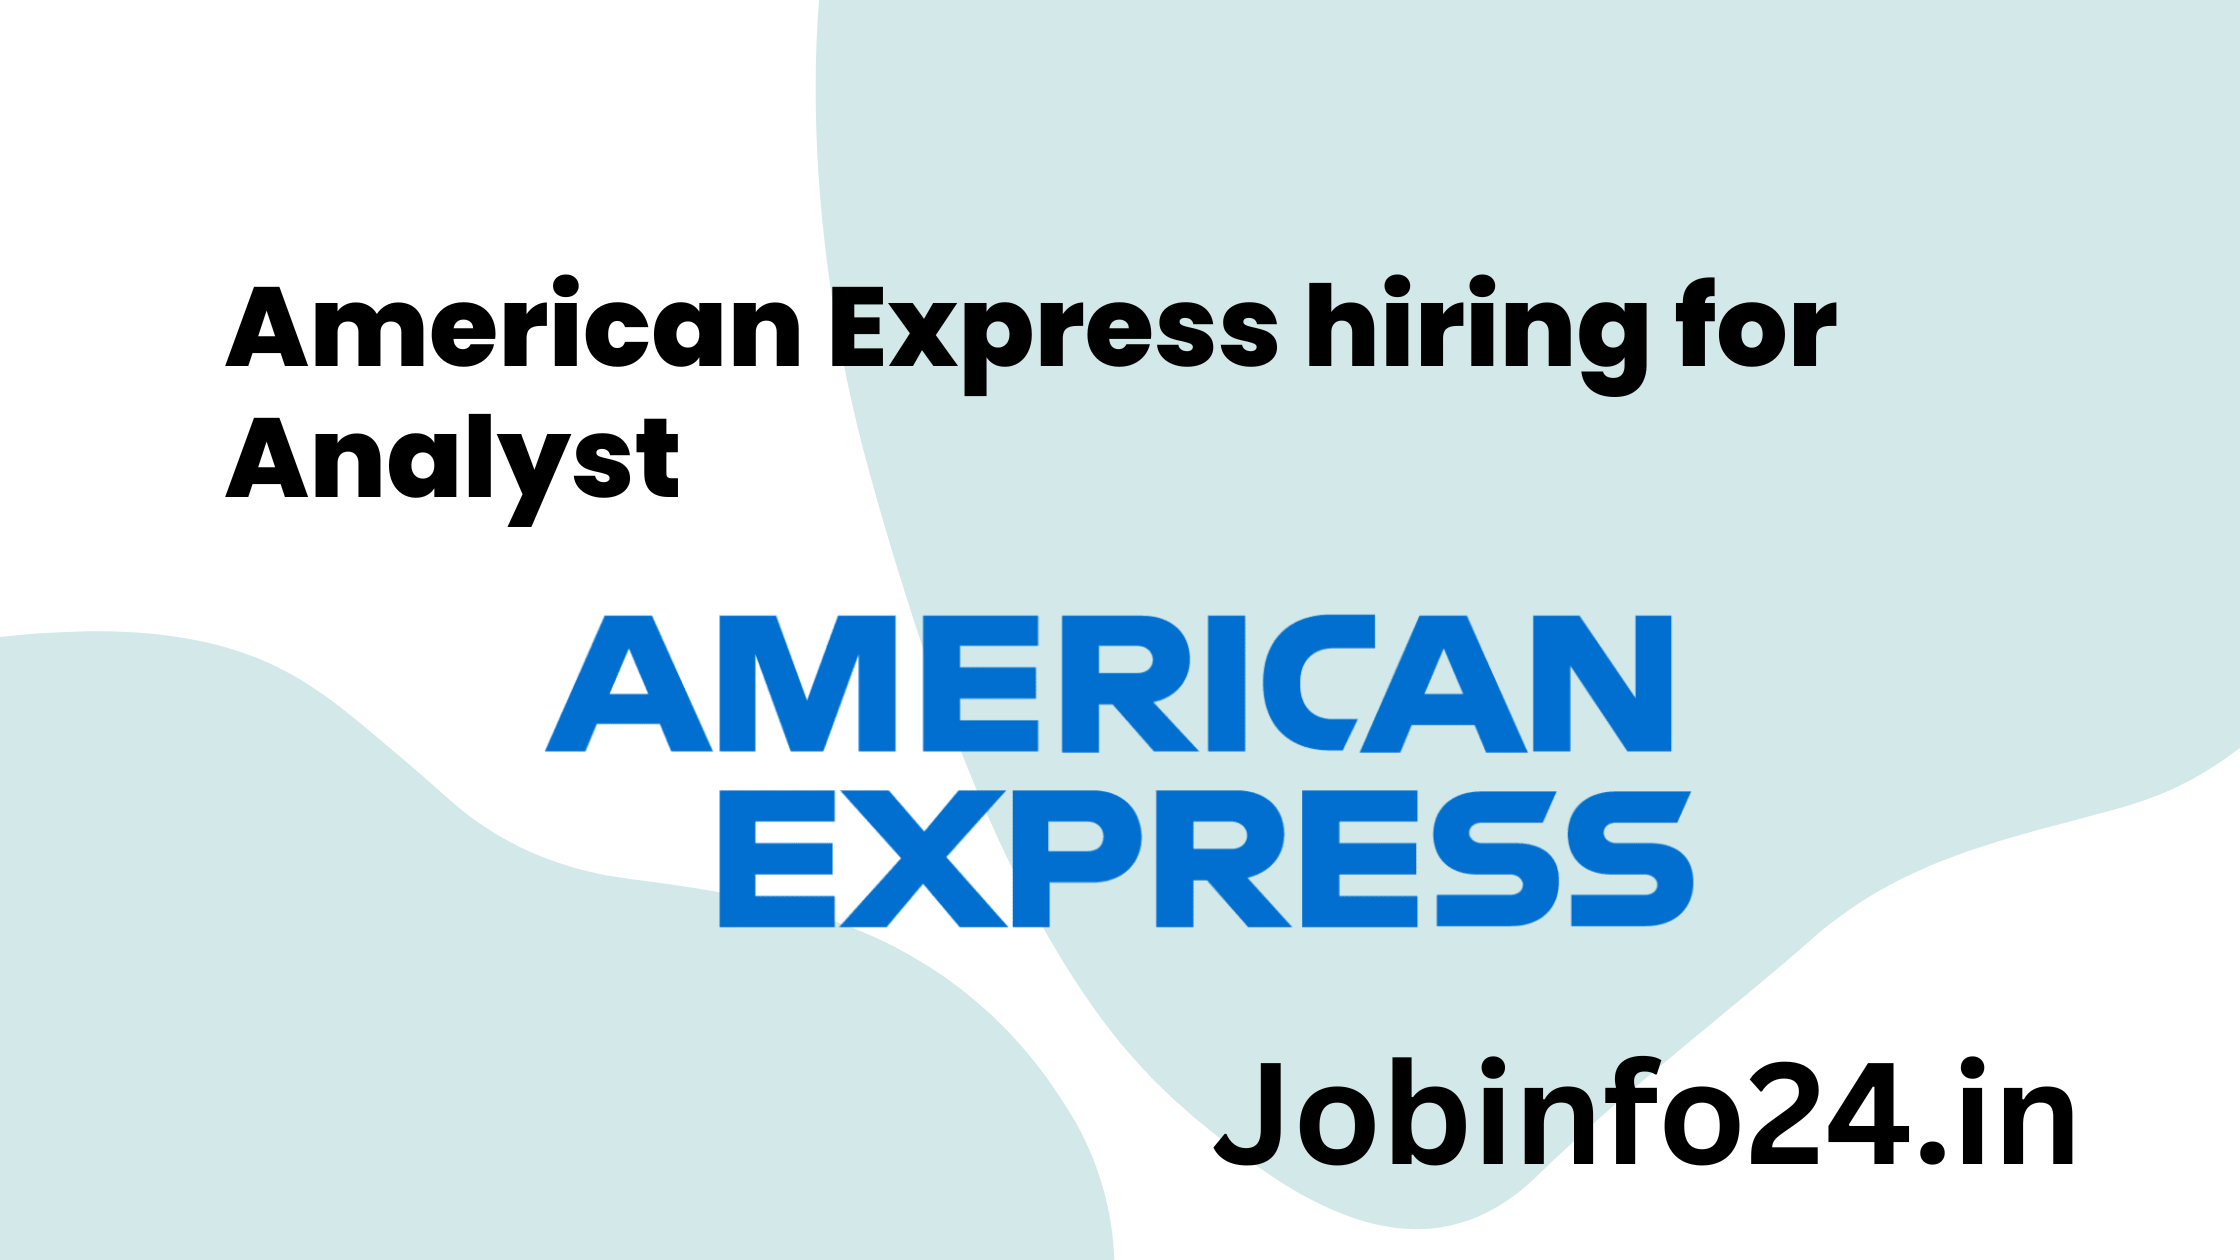 American Express hiring for Analyst